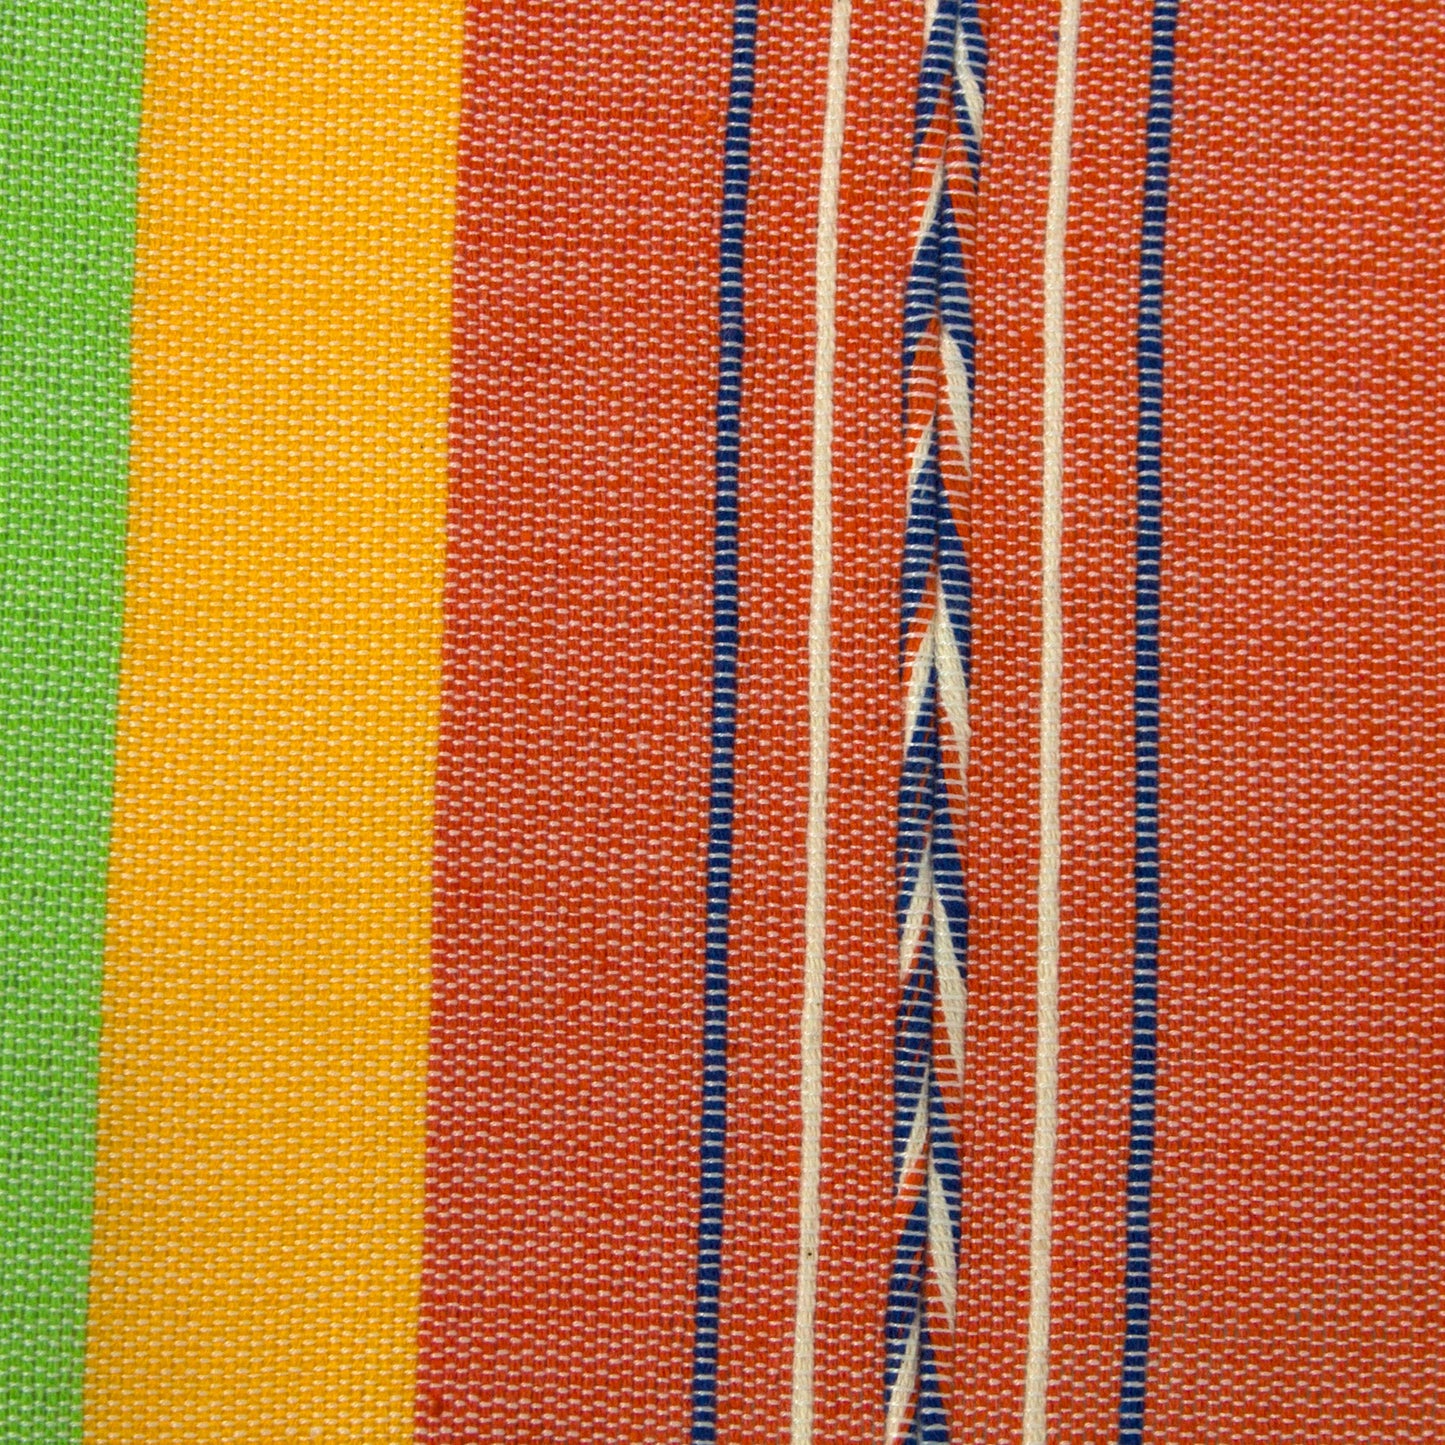 Fiesta Hues Hand Woven Multicolor Cotton Placemats